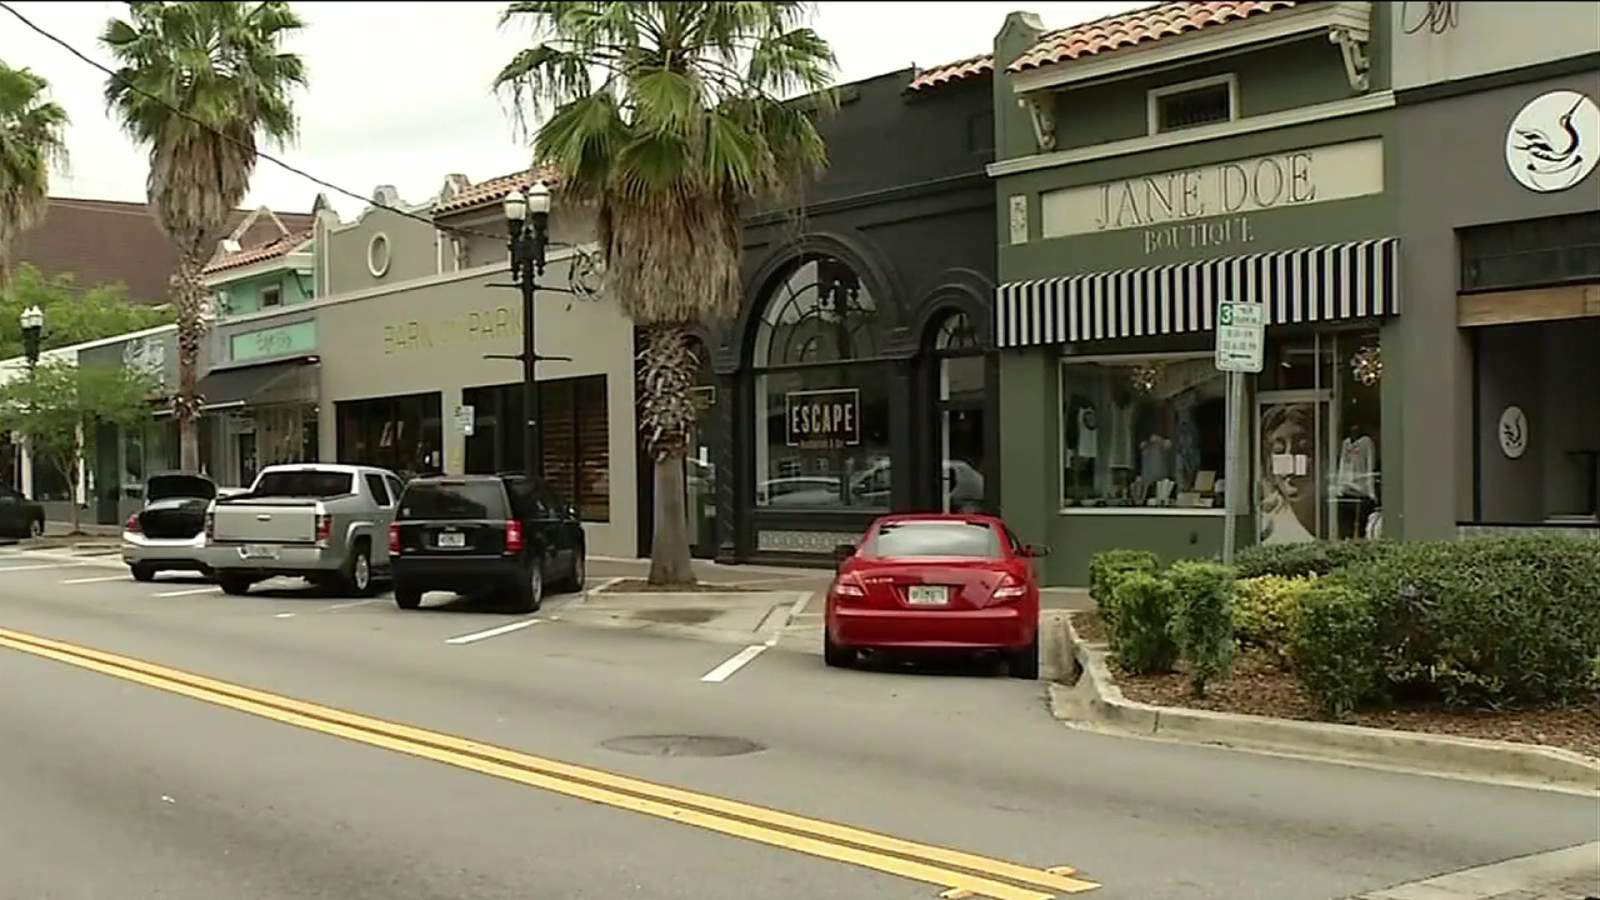 Mayor of Jacksonville wanting changes he'd like to see in small businesses re-open